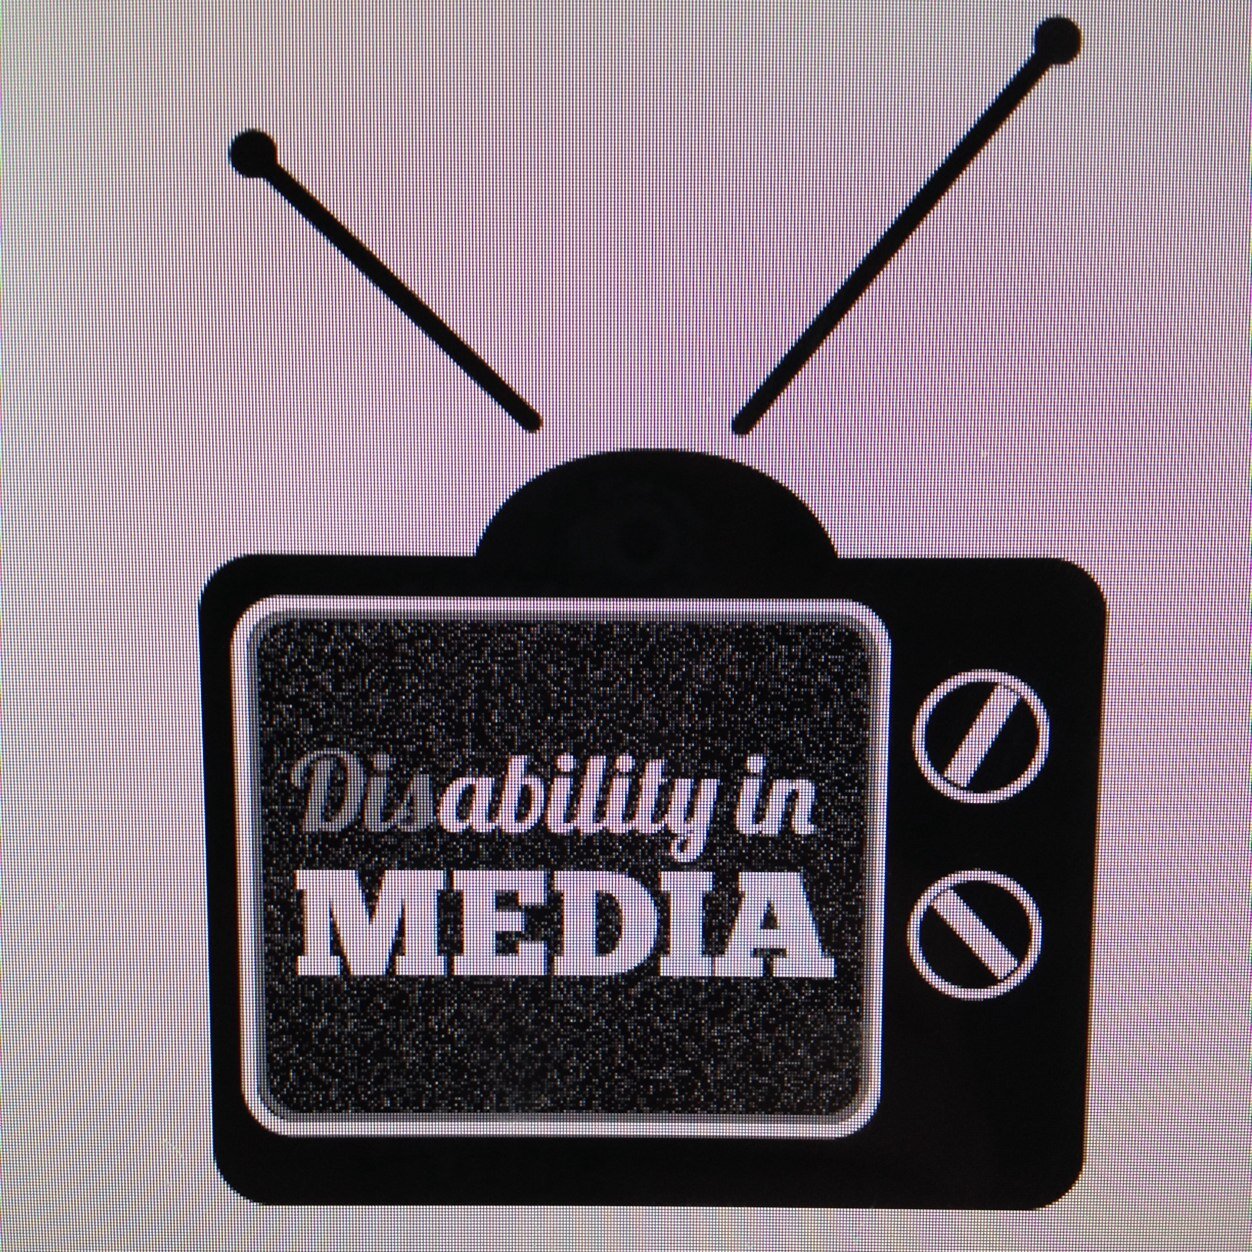 We educate, integrate, & include people who happen to have a disability within the international media & sports industries. Managed by @BeckyMotivates!